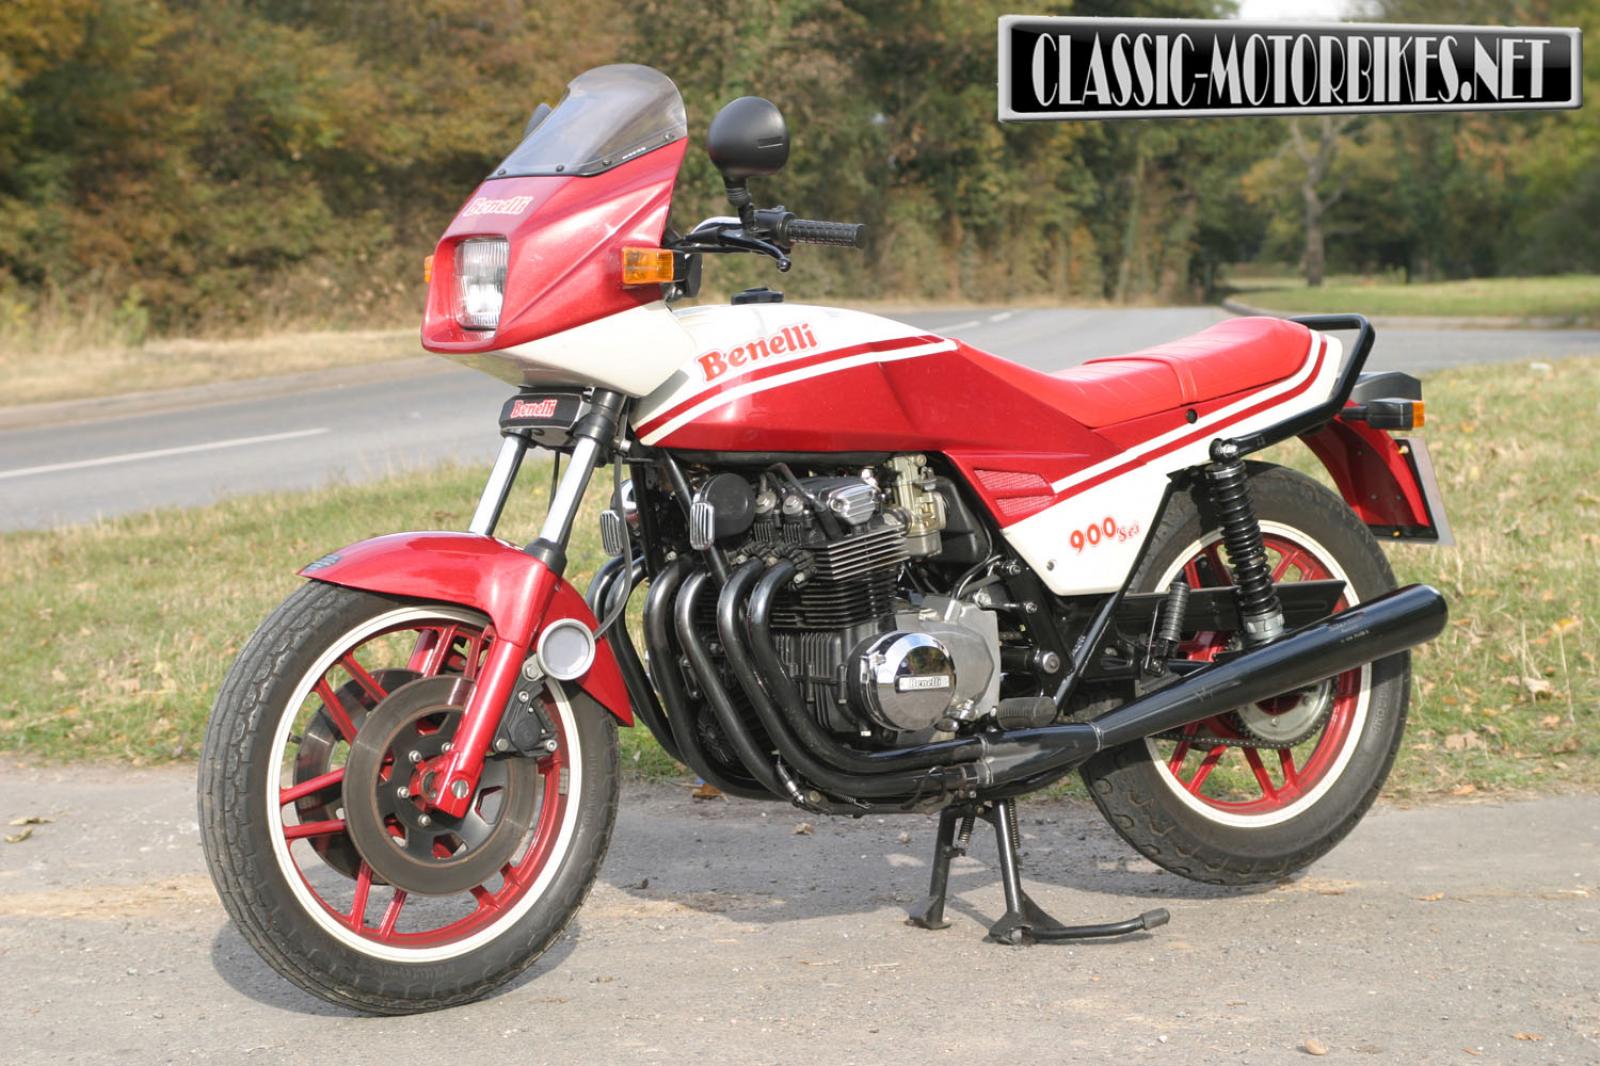 Review of Benelli 654 Sport 1986: pictures, live photos 